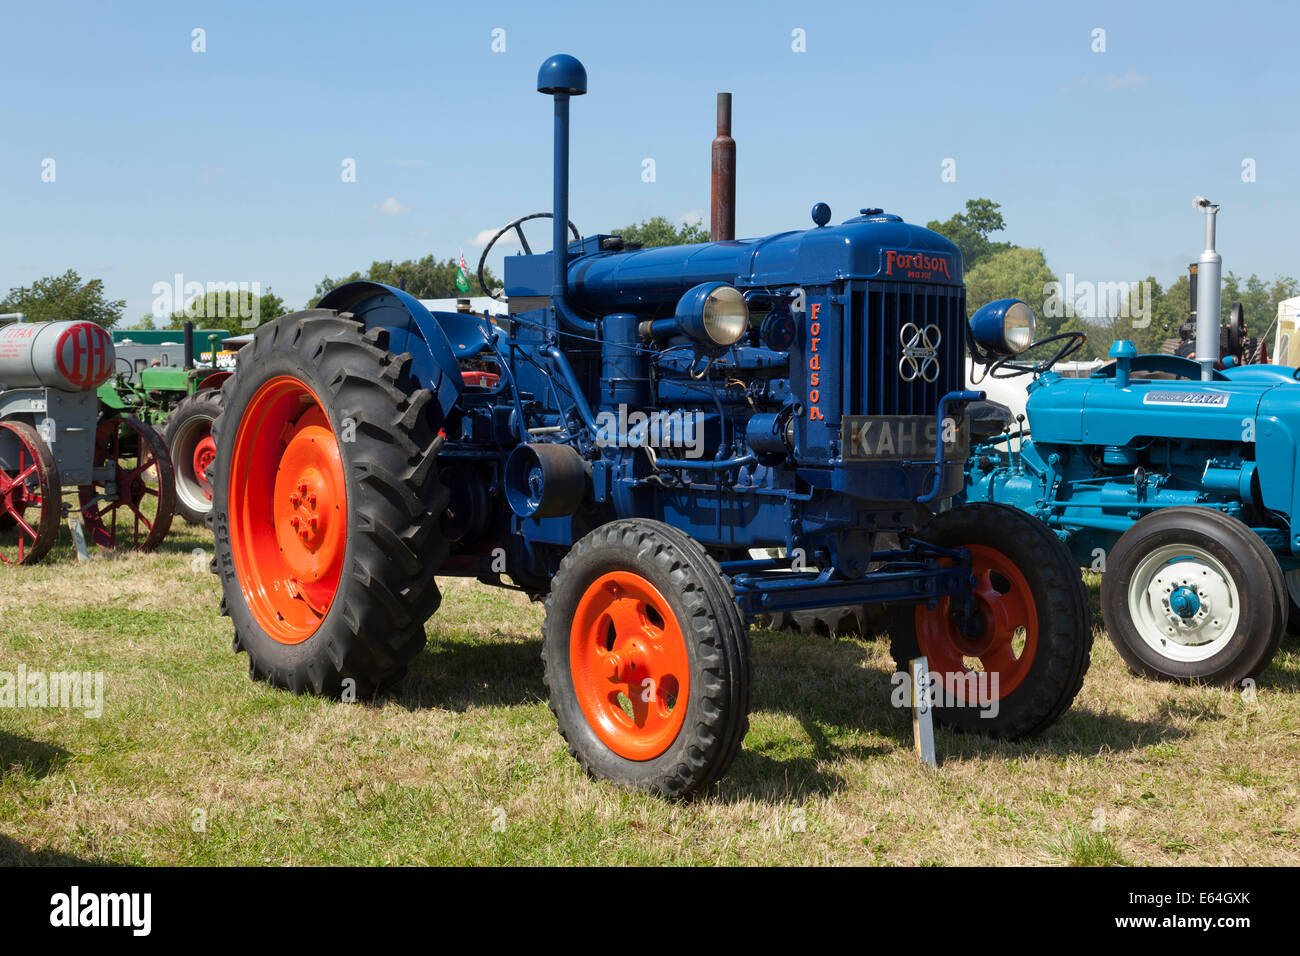 Fordson Major tractor on display at a country fair show Stock Photo